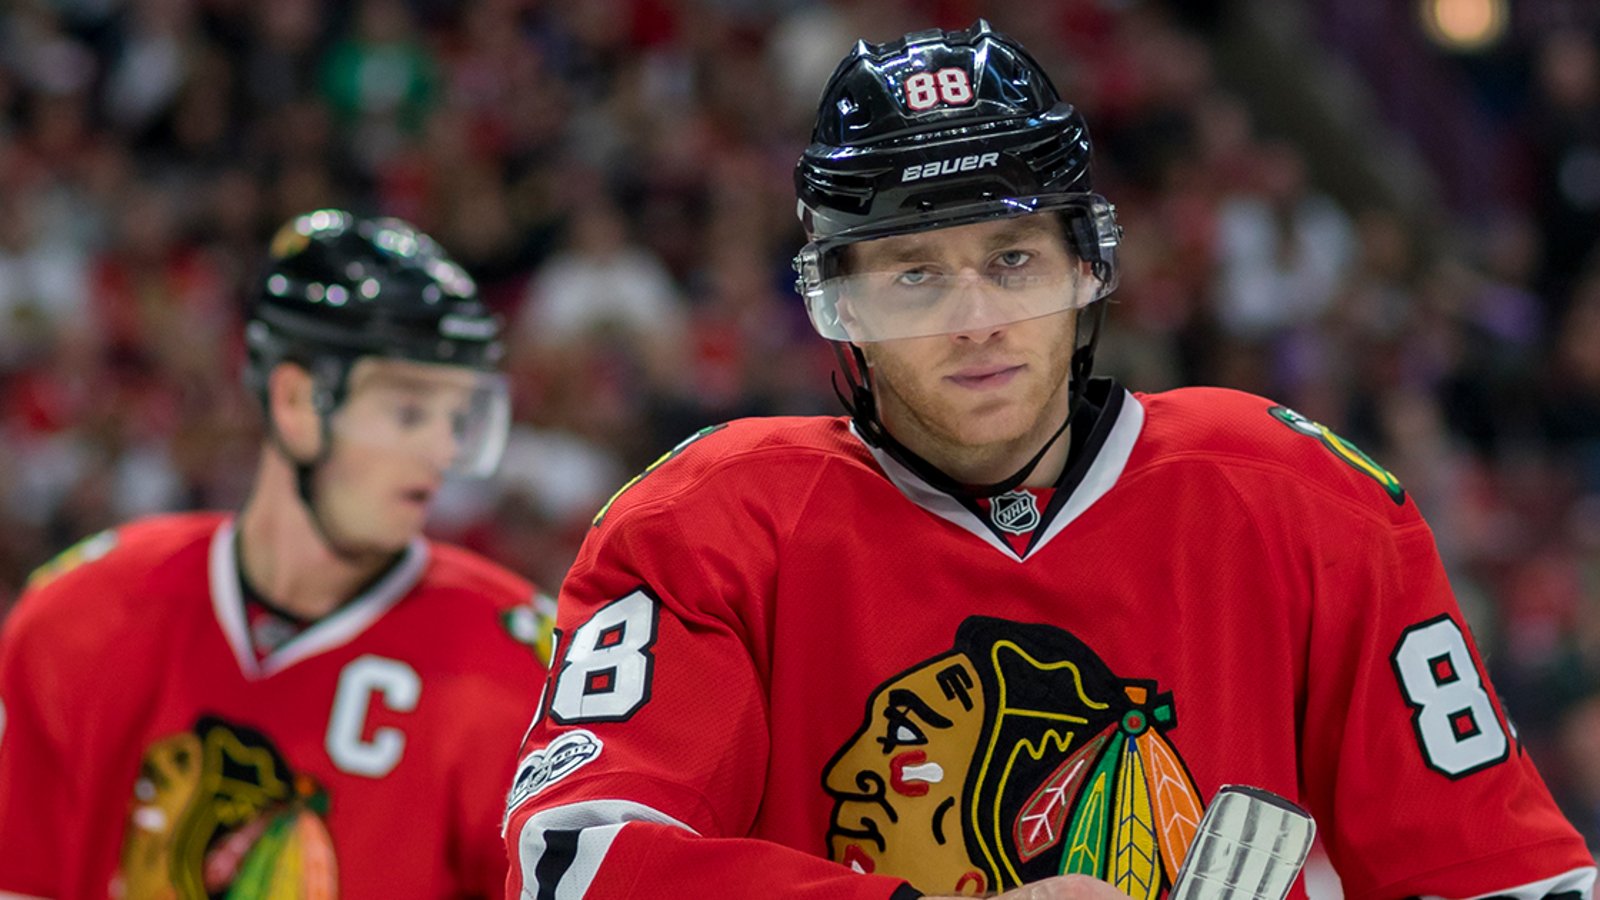 Breaking: NHL hands out HUGE punishment to Hawks’ Kane